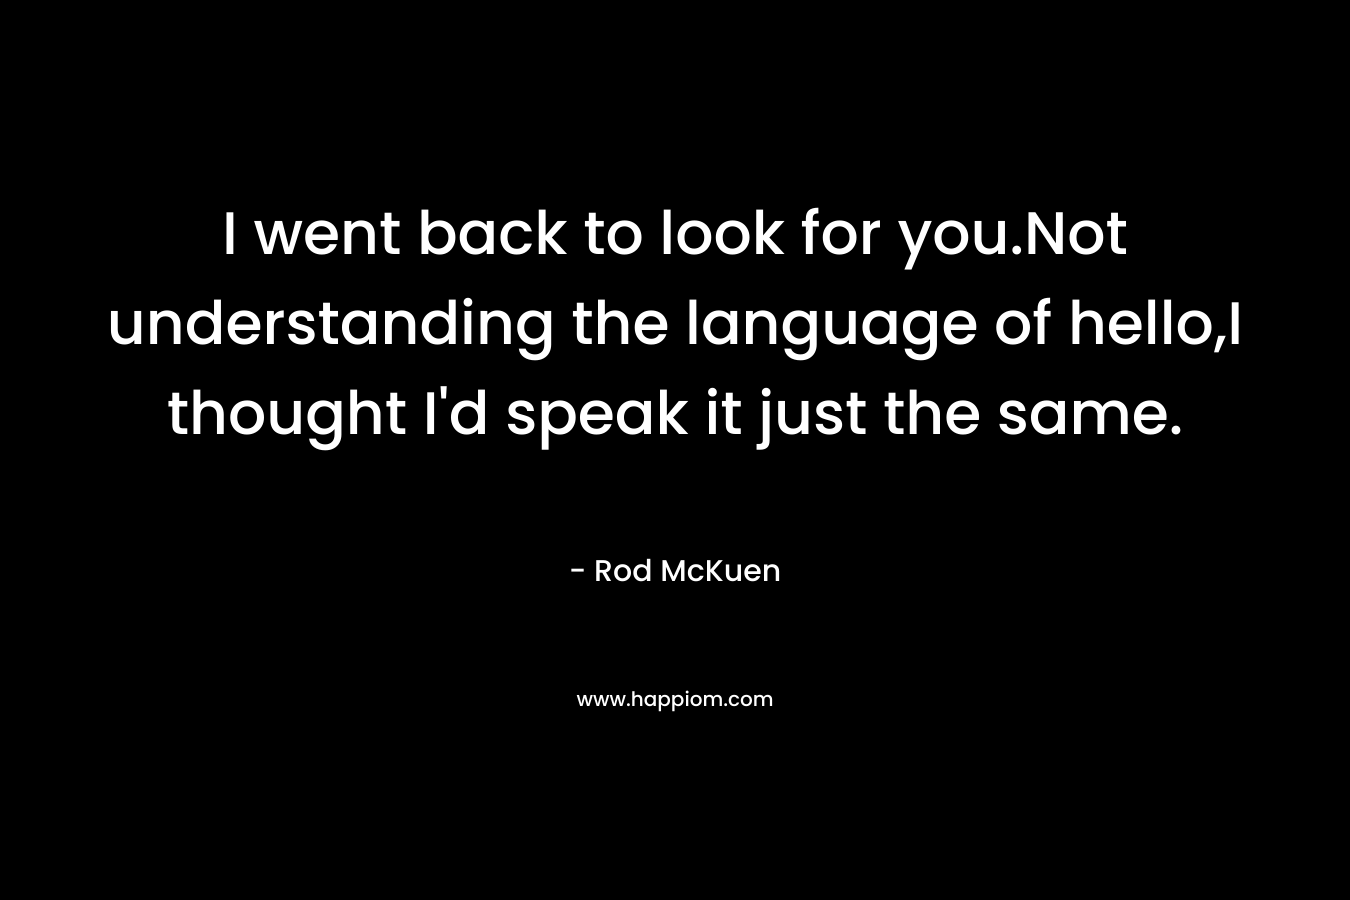 I went back to look for you.Not understanding the language of hello,I thought I’d speak it just the same. – Rod McKuen